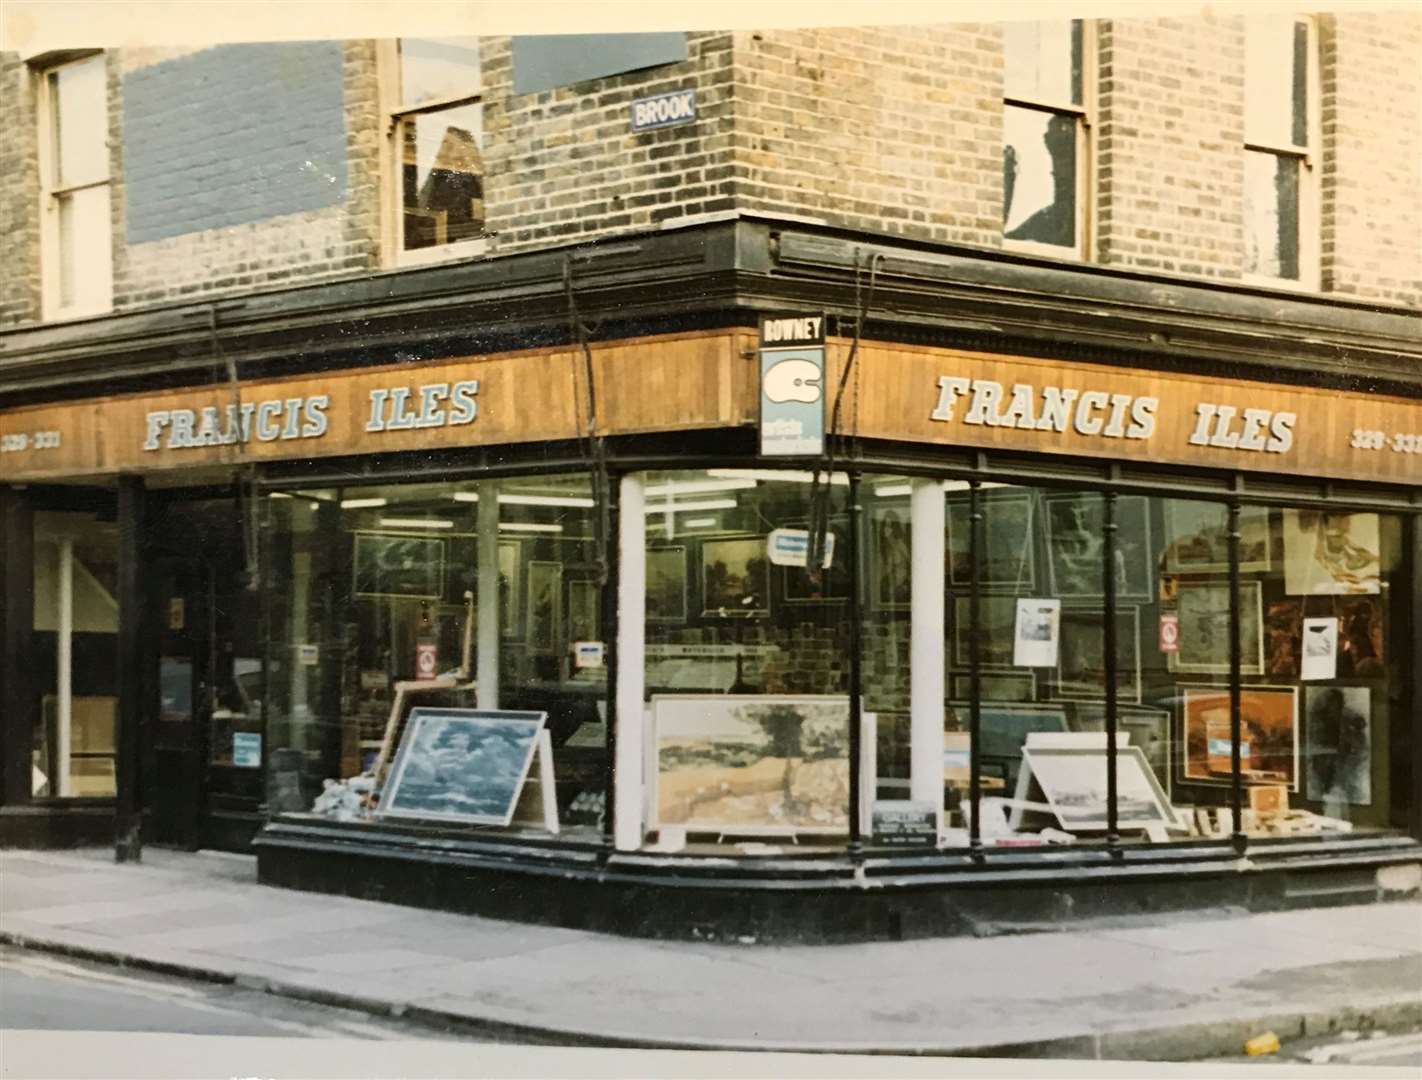 Francis Iles art shop and gallery in The Brook, Chatham